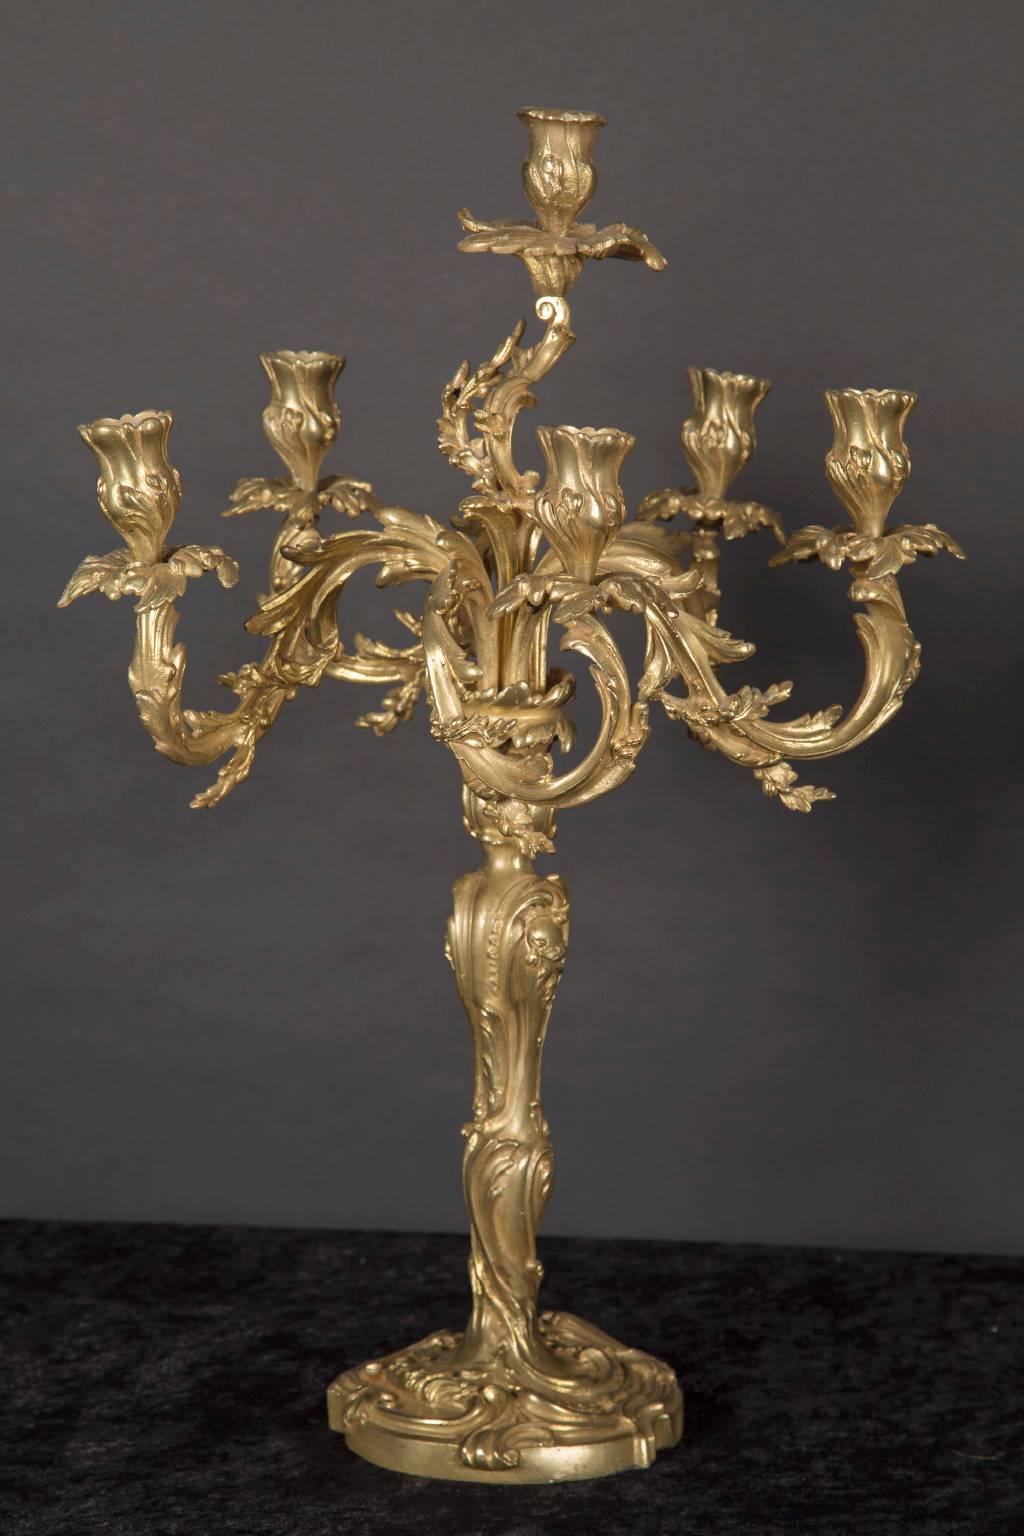 This grand pair of bronze d’oré candelabra features floriate candle cups, leaf bobeches, and arms in the classic Rococo style. The French antique pair dates back to the 19th century and sports a center stem & foot also decorated in a floriate manner